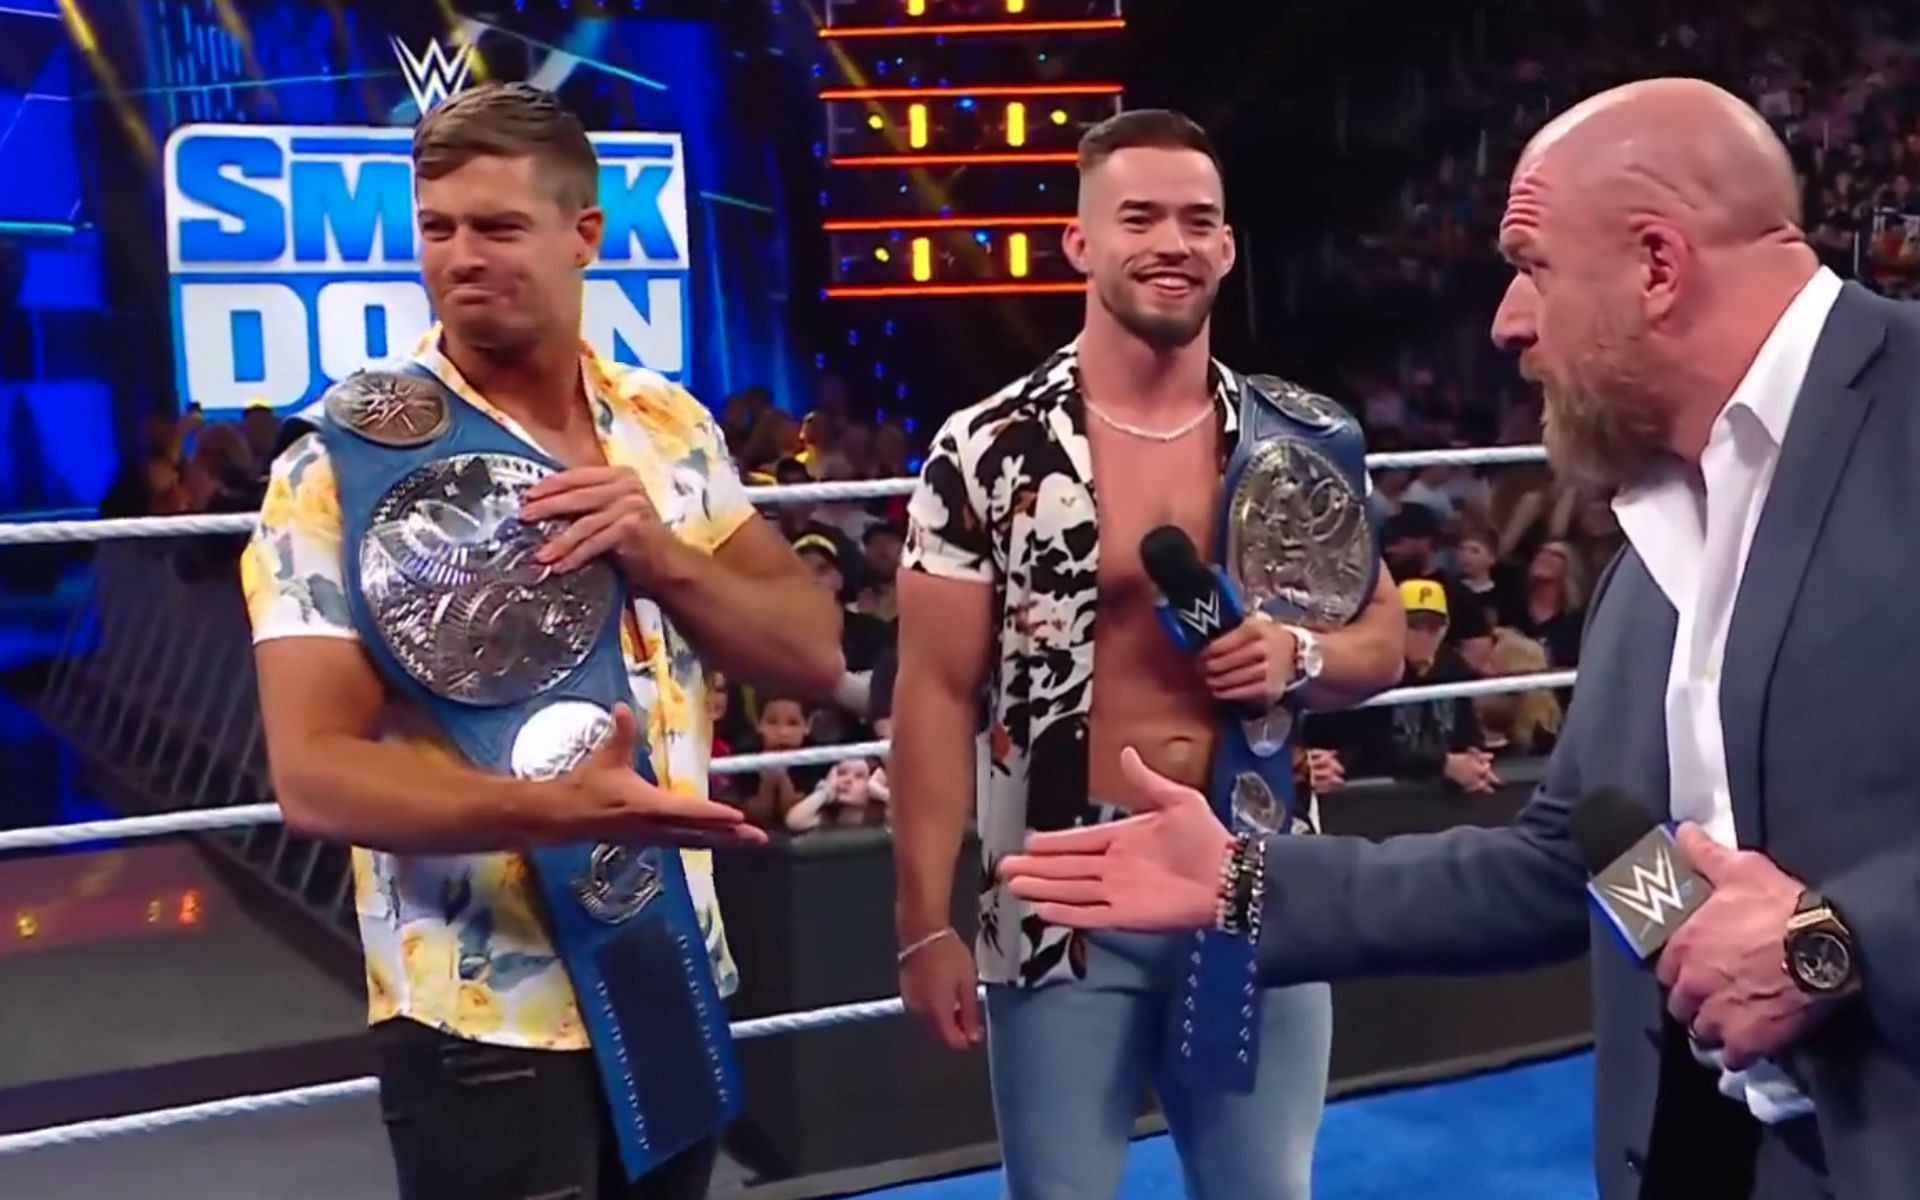 A big win for A-Town Down under after SmackDown went off the air